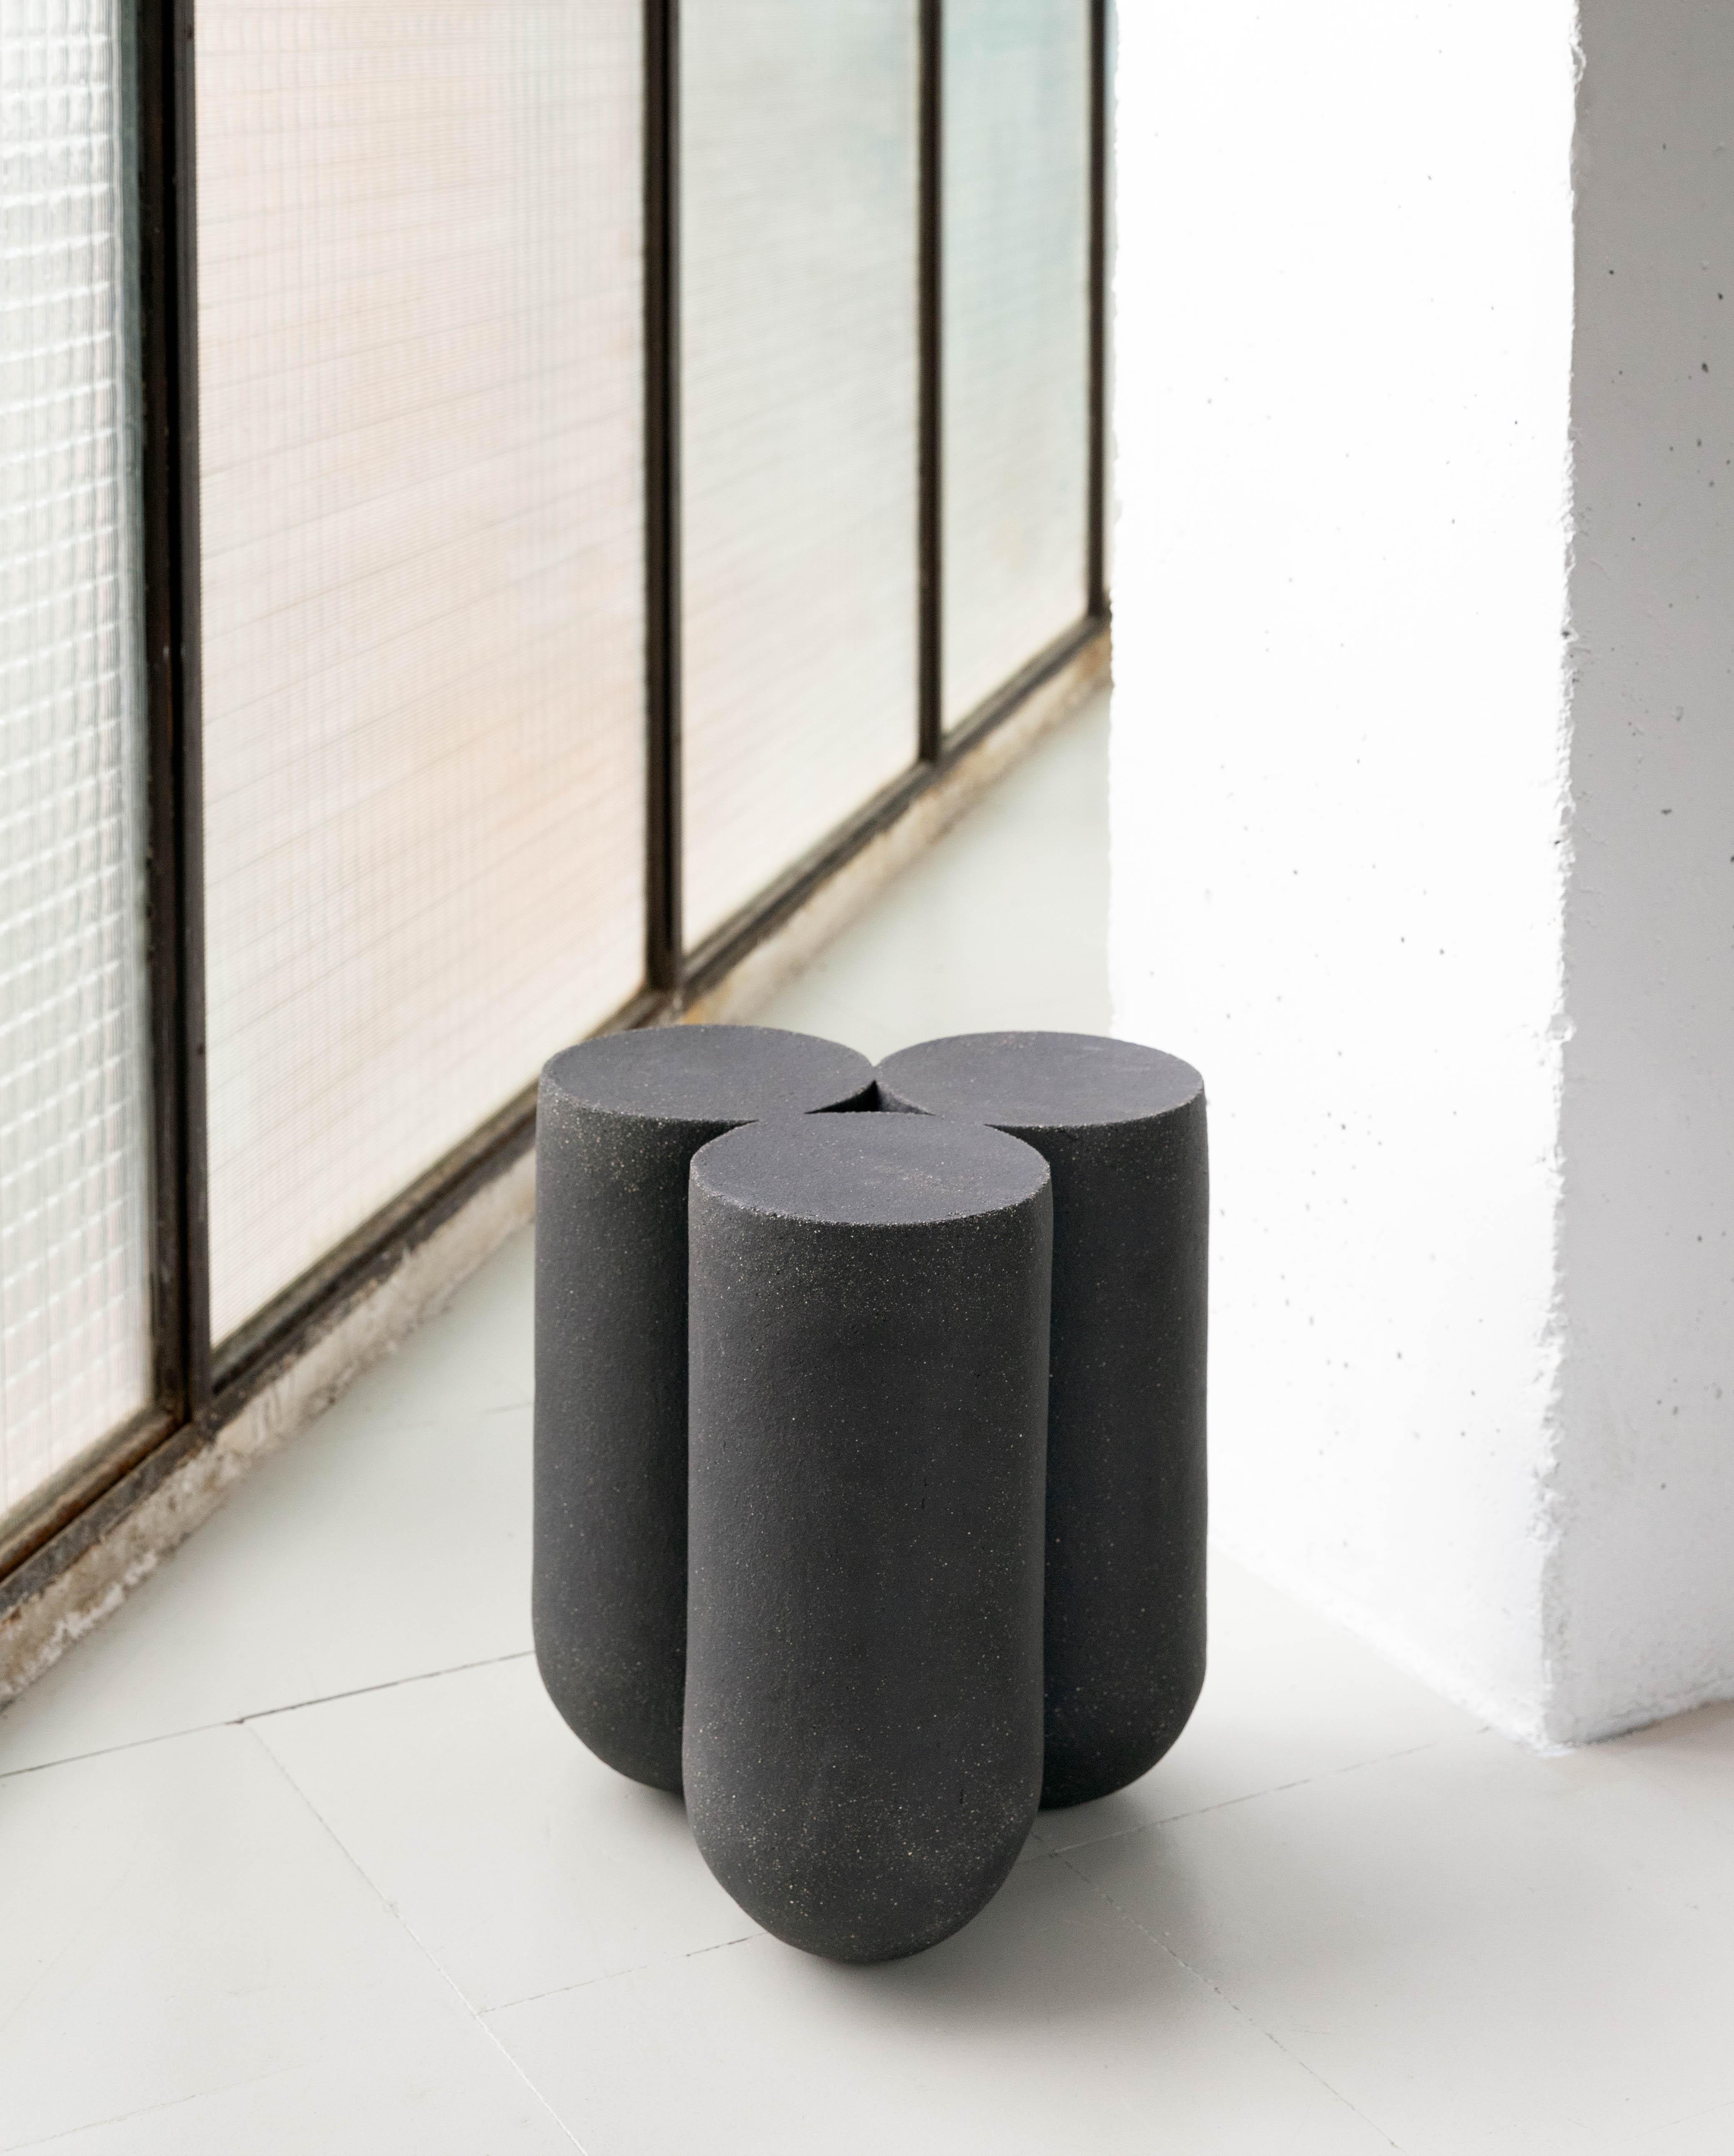 Clay Moor Side Table by Lisa Allegra
Dimensions: Ø 32 x H 35 cm.
Materials: Clay.

Born in 1986 in Paris, Lisa Allegra has earned in 2010 a degree in furniture design from the École Supérieure des Arts Décoratifs. She has worked for Tsé&Tsé